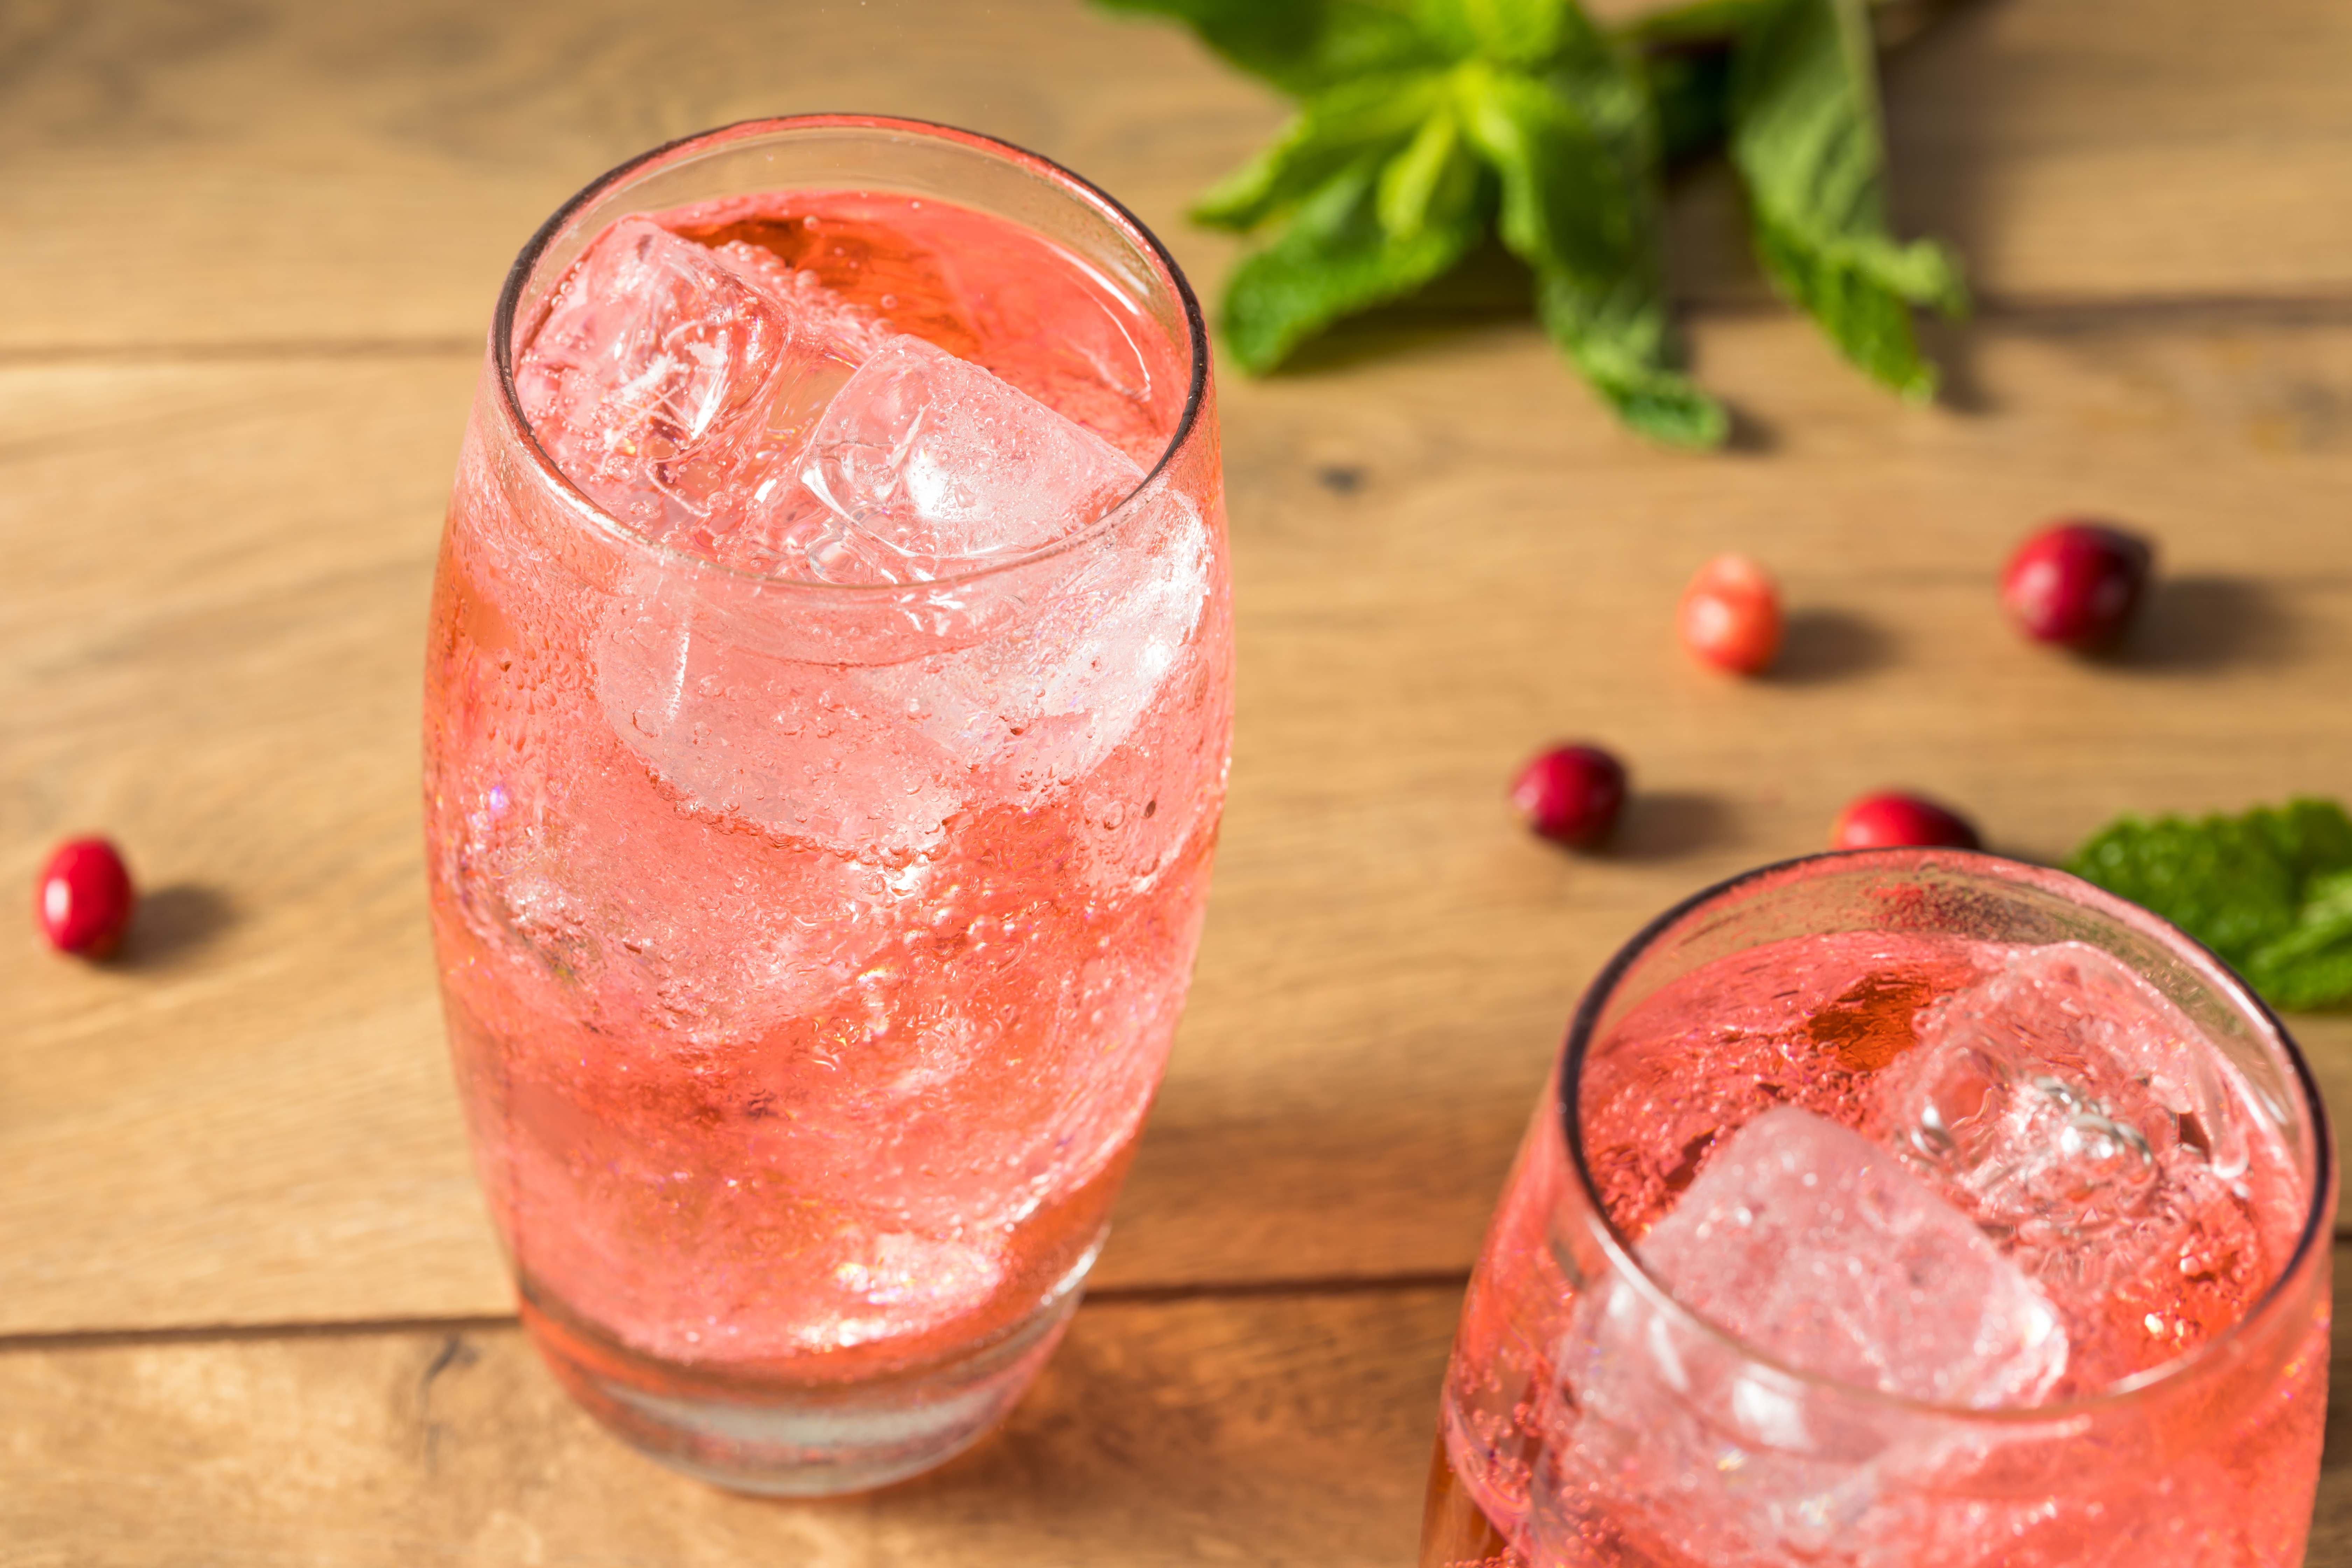 Two curved highball glasses full of ice cubes and a light pink soda are set on a wood table, surrounded by scattered cranberries and leaves.